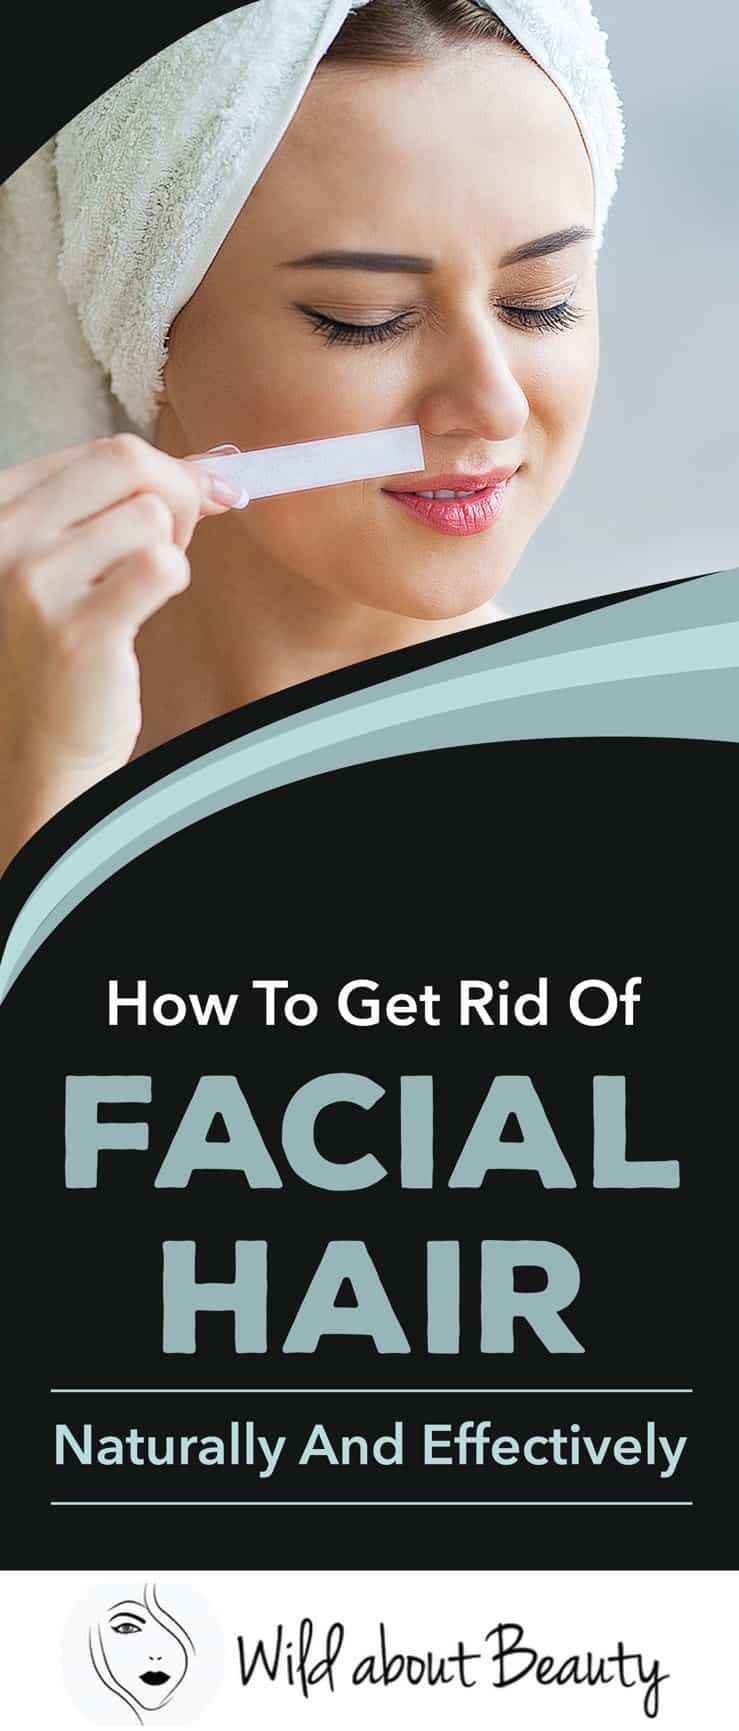 How To Get Rid Of Facial Hair